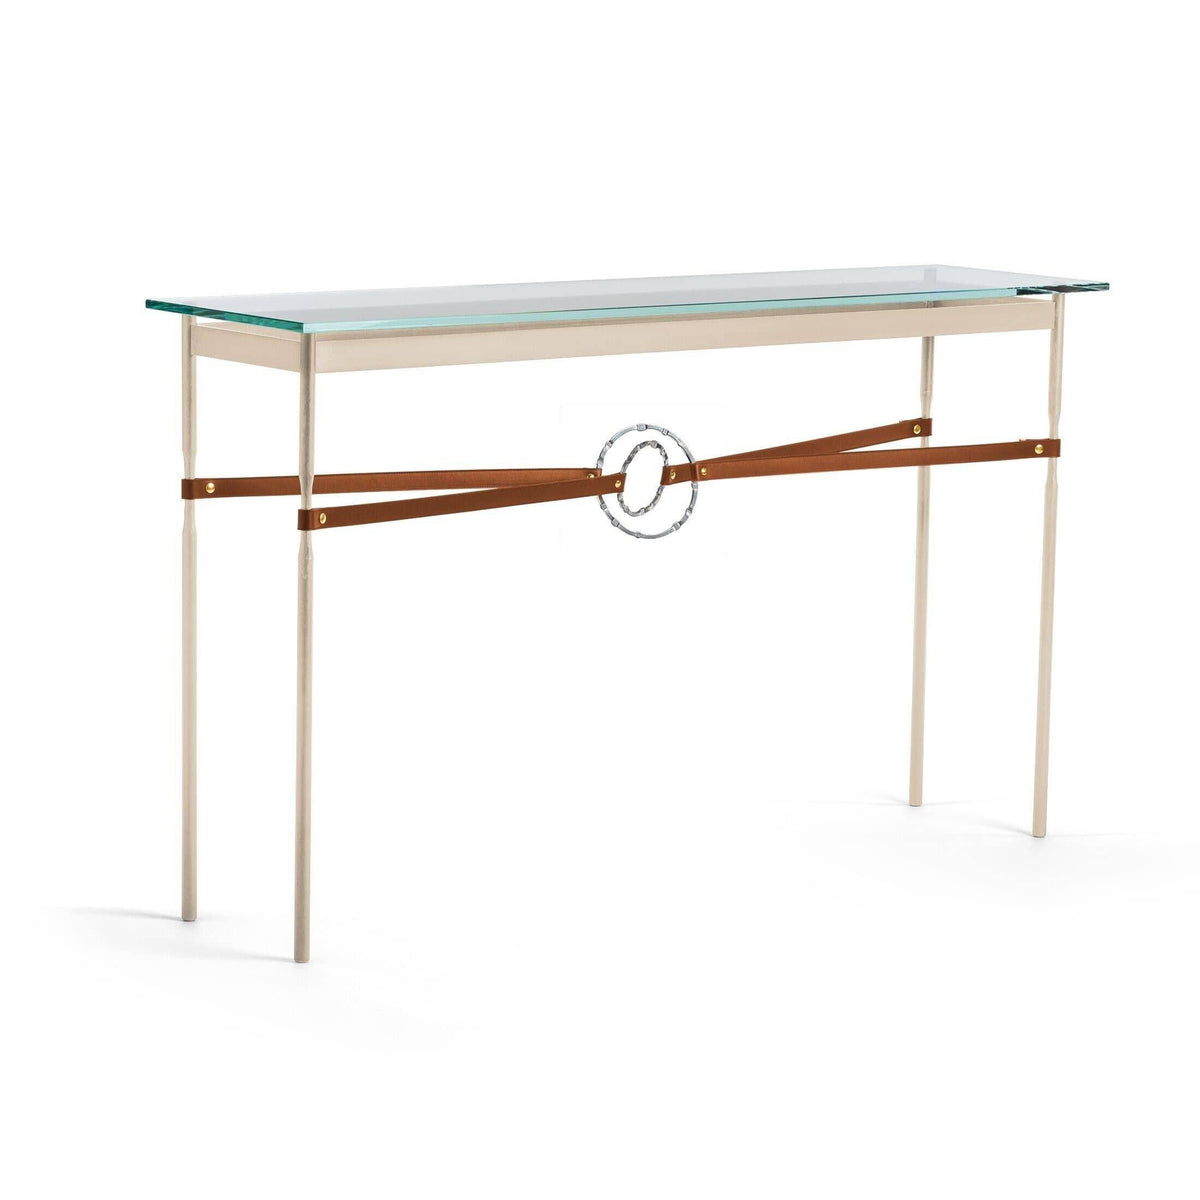 Hubbardton Forge - Equus Chestnut Leather Console Table - 750118-84-85-LC-VA0714 | Montreal Lighting & Hardware